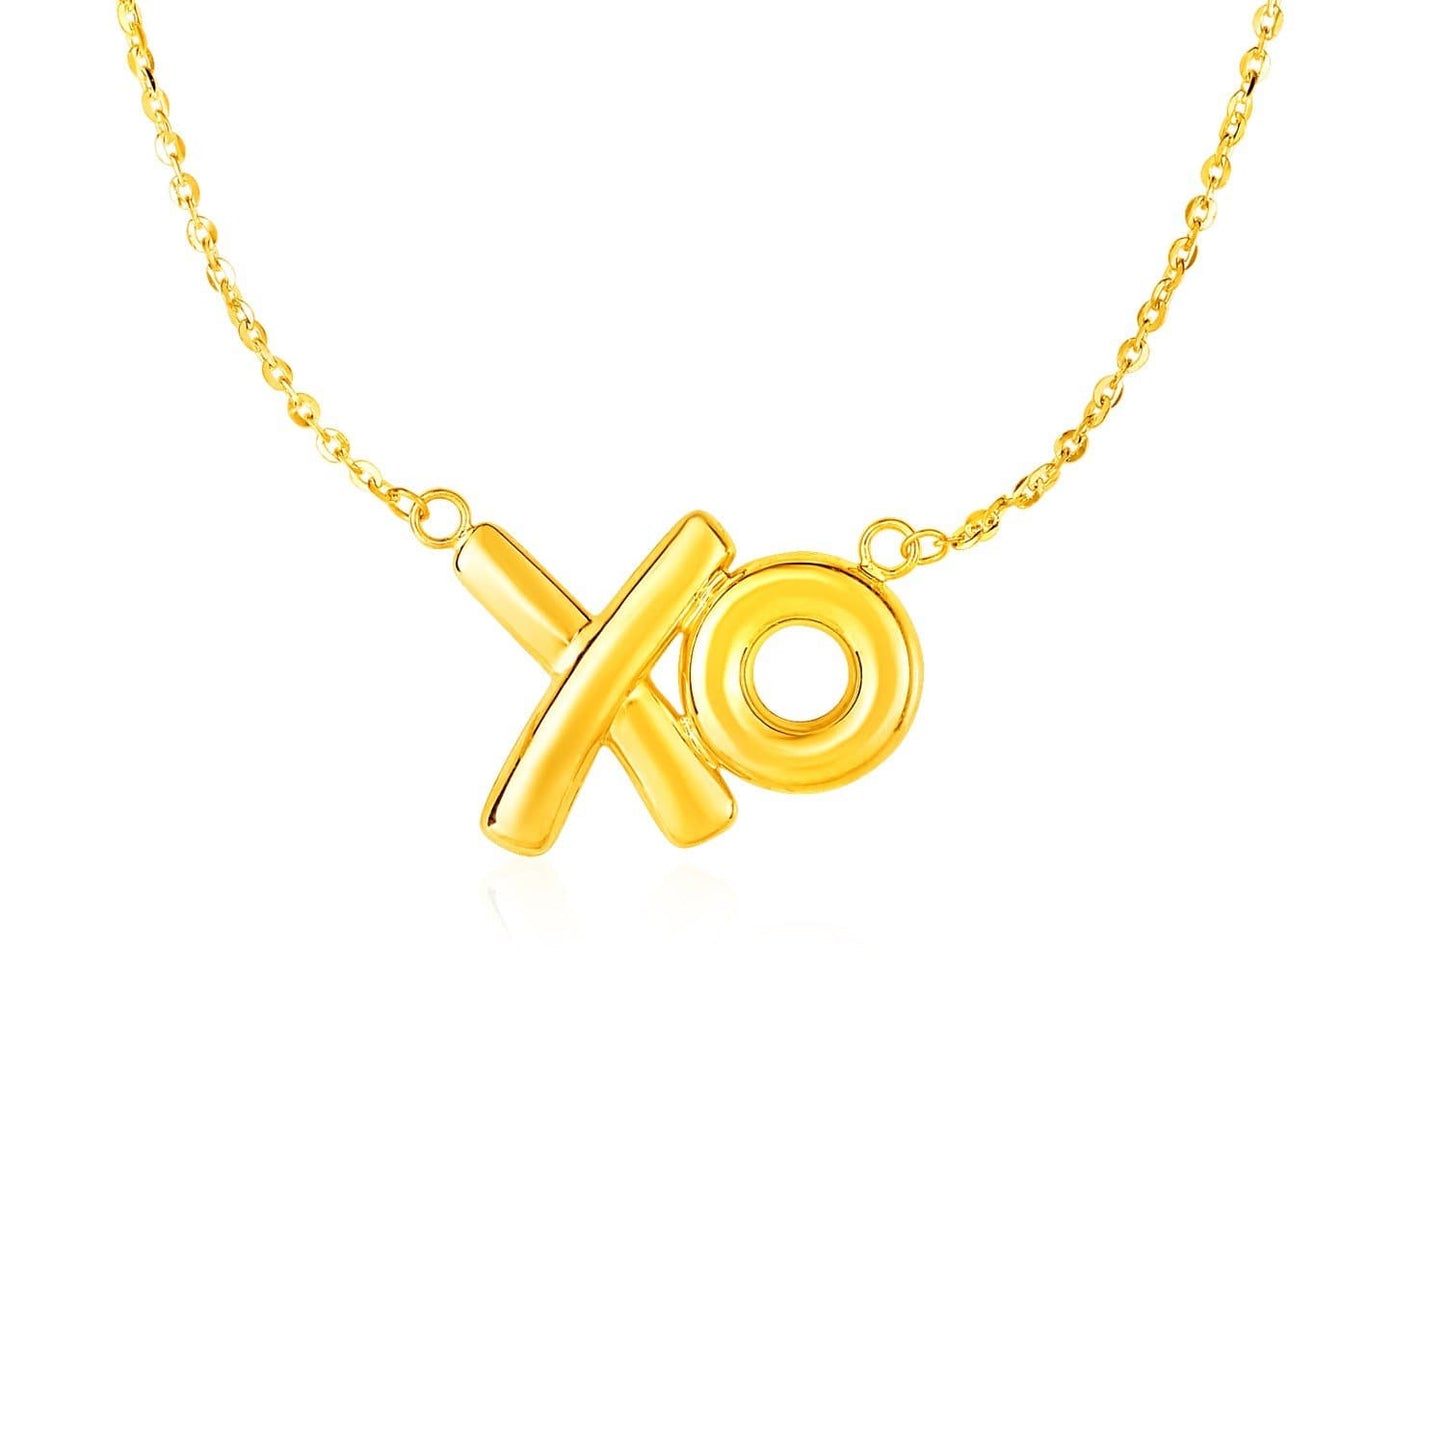 Pendant with XO Symbols in 14k Yellow Gold